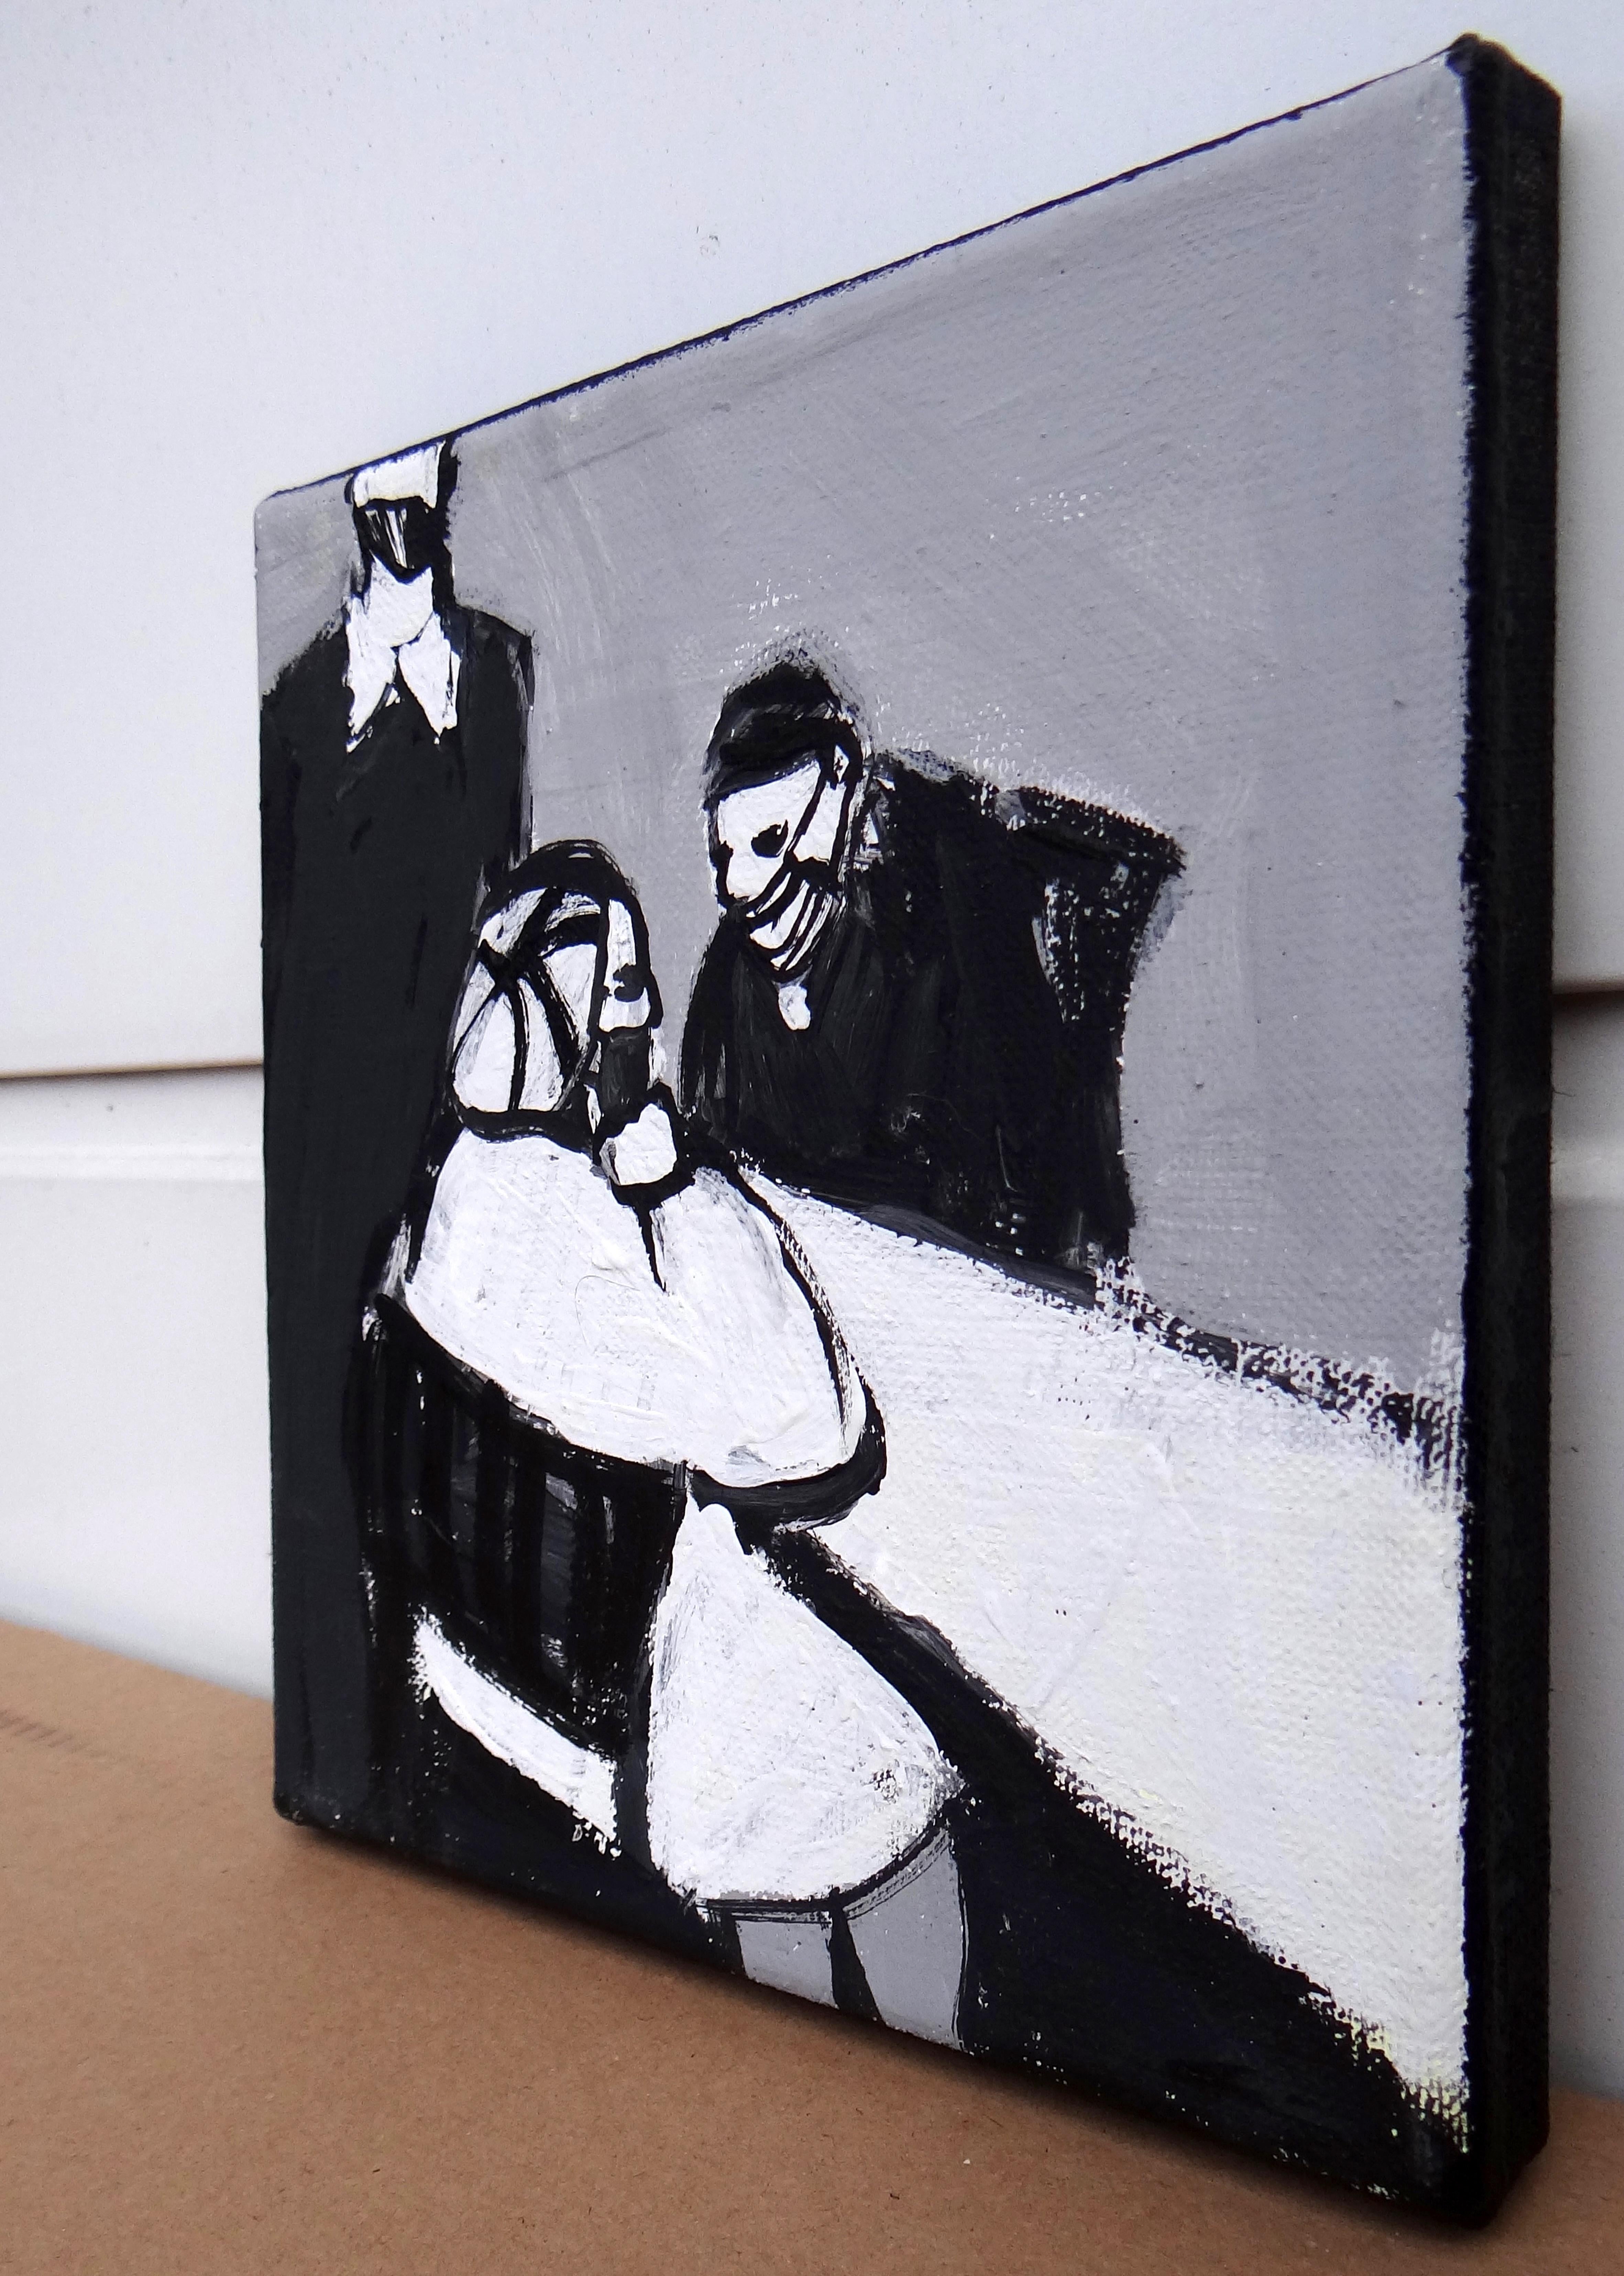 In der Cafeteria  - Contemporary Expressive Symbolic Black-White Painting im Angebot 2